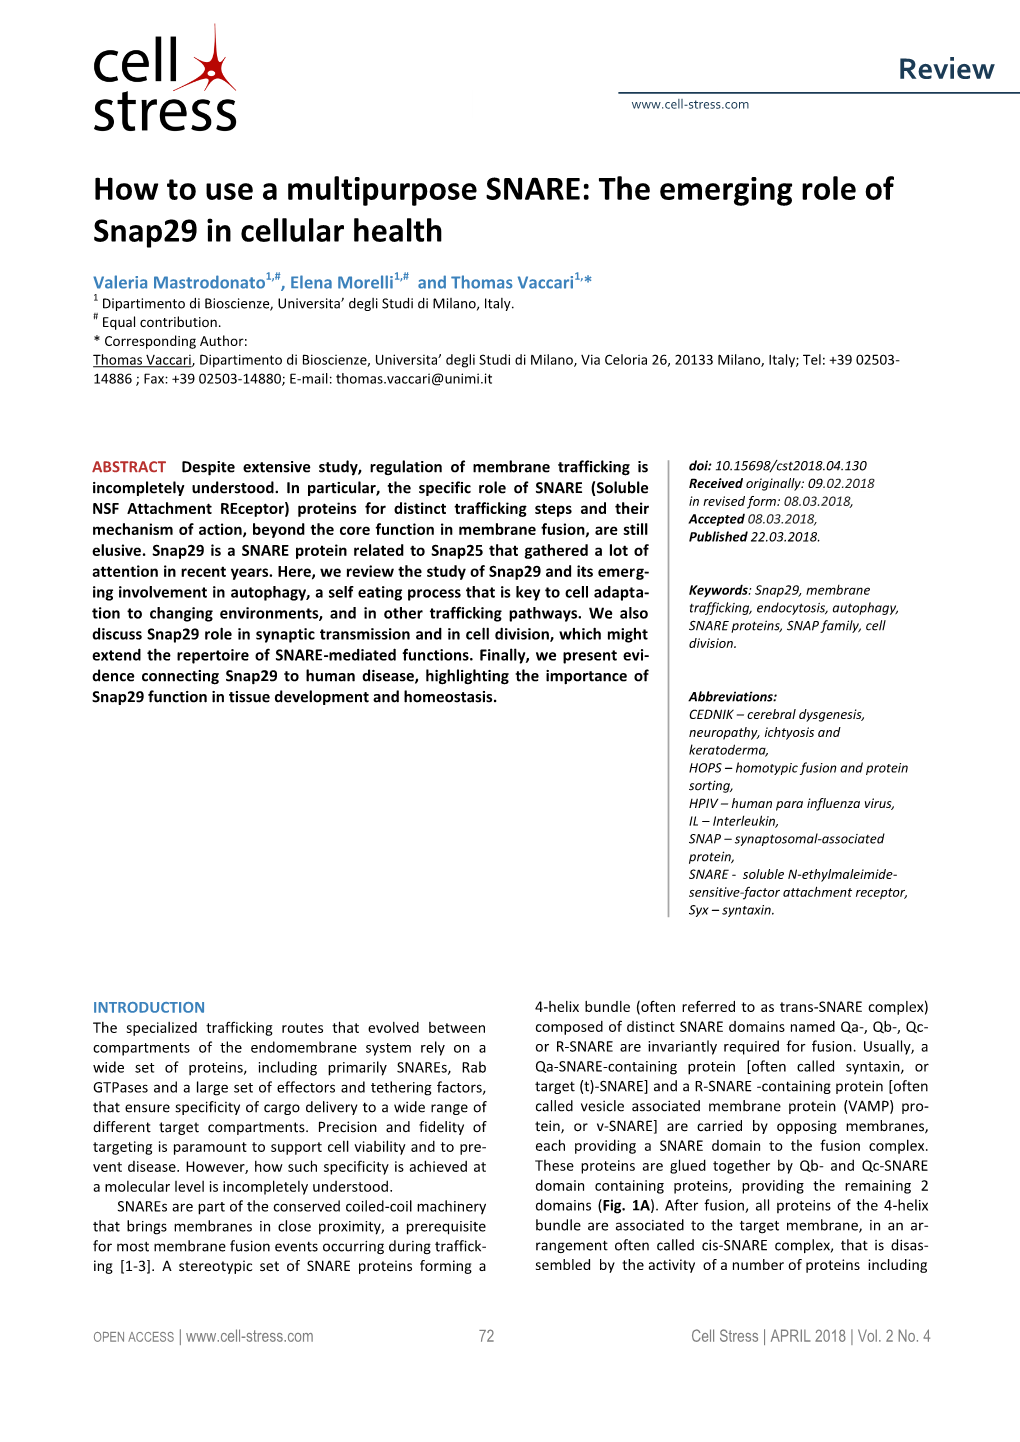 The Emerging Role of Snap29 in Cellular Health